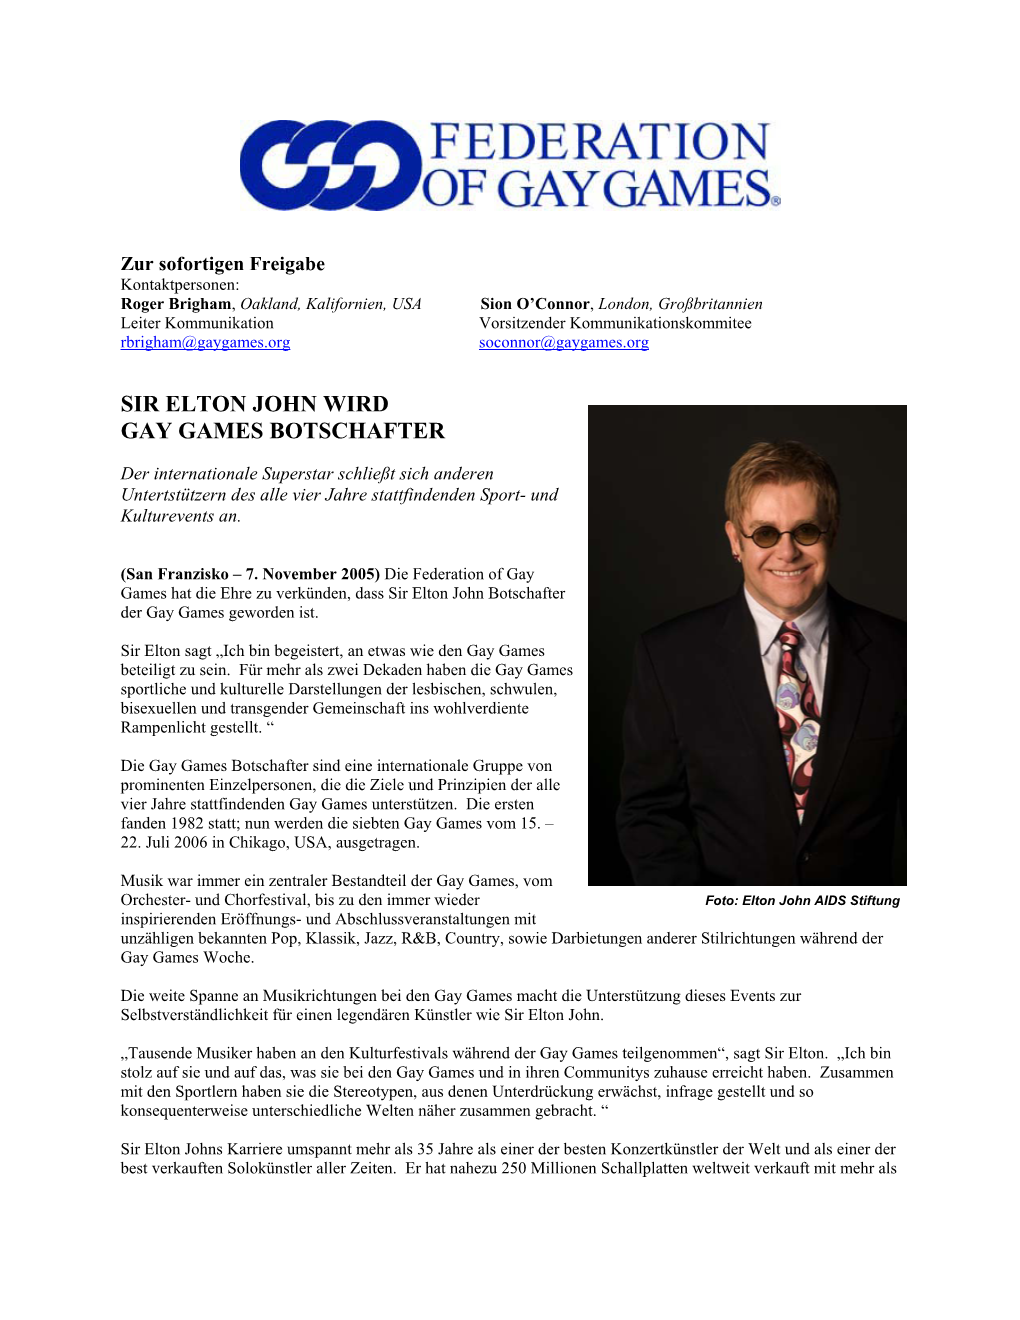 Chicago 2006 Gay Games “On Track for Success”